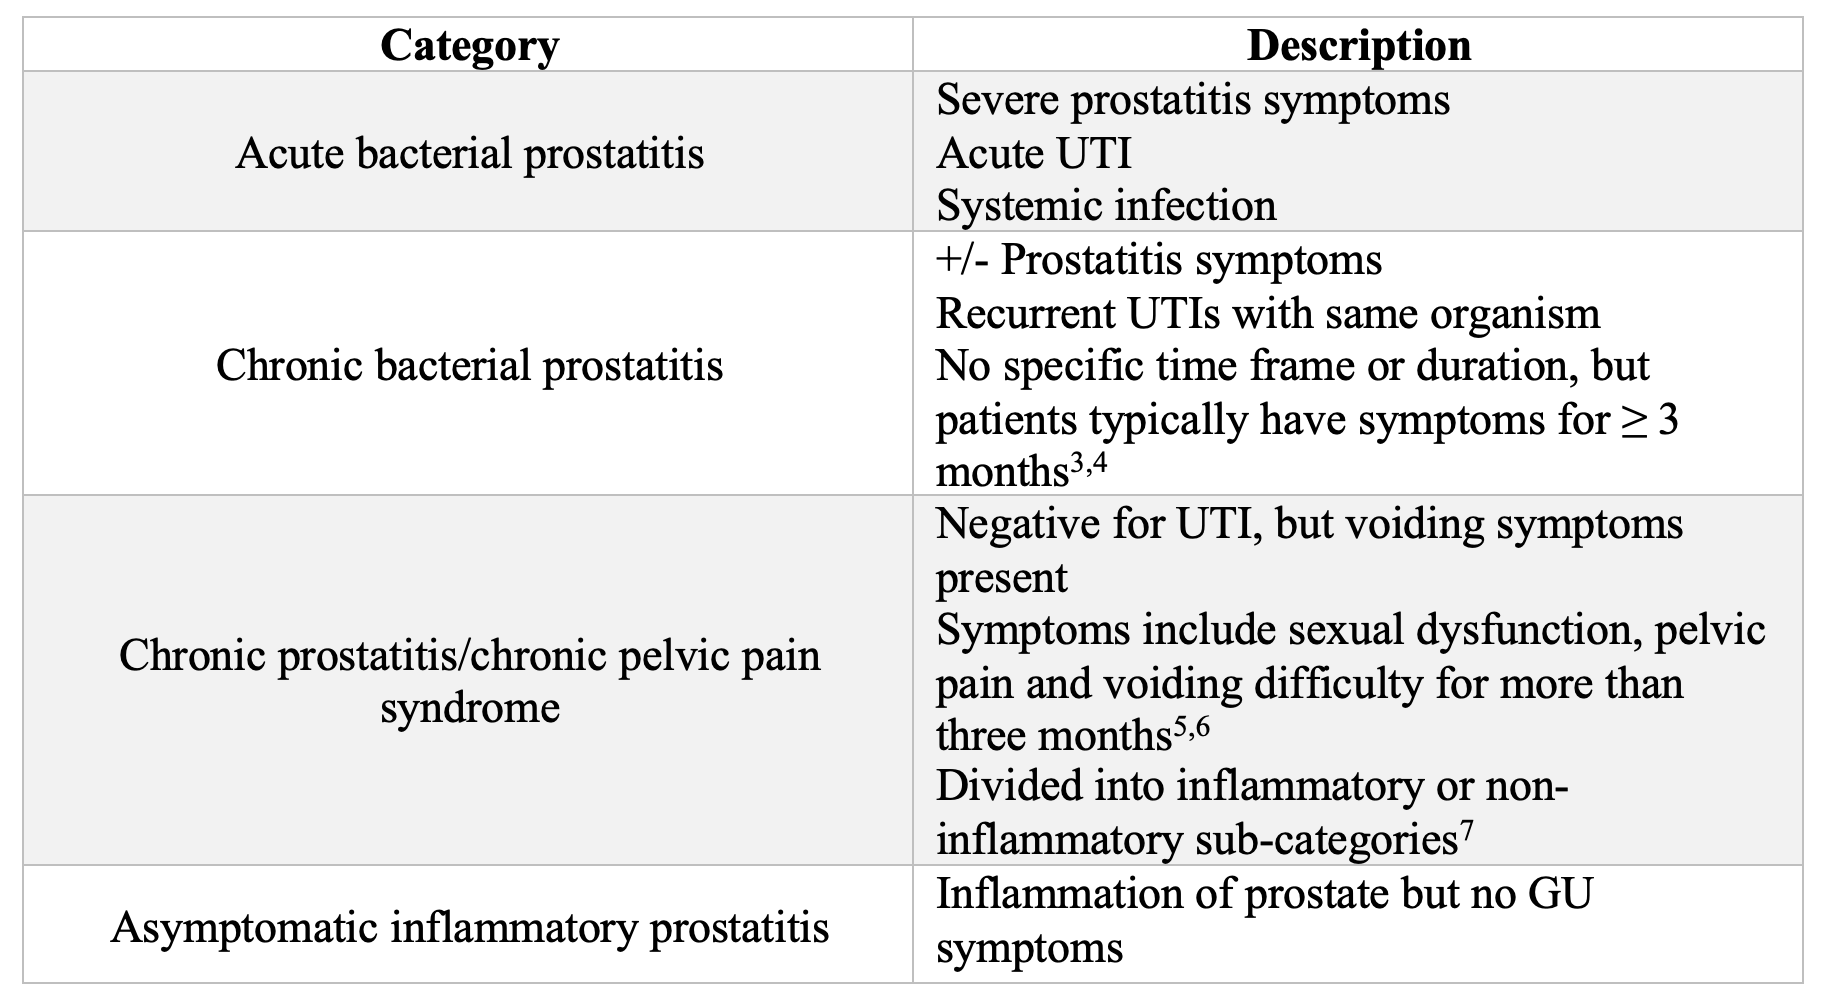 For the purposes of this article, we’ll focus on acute bacterial prostatiti...